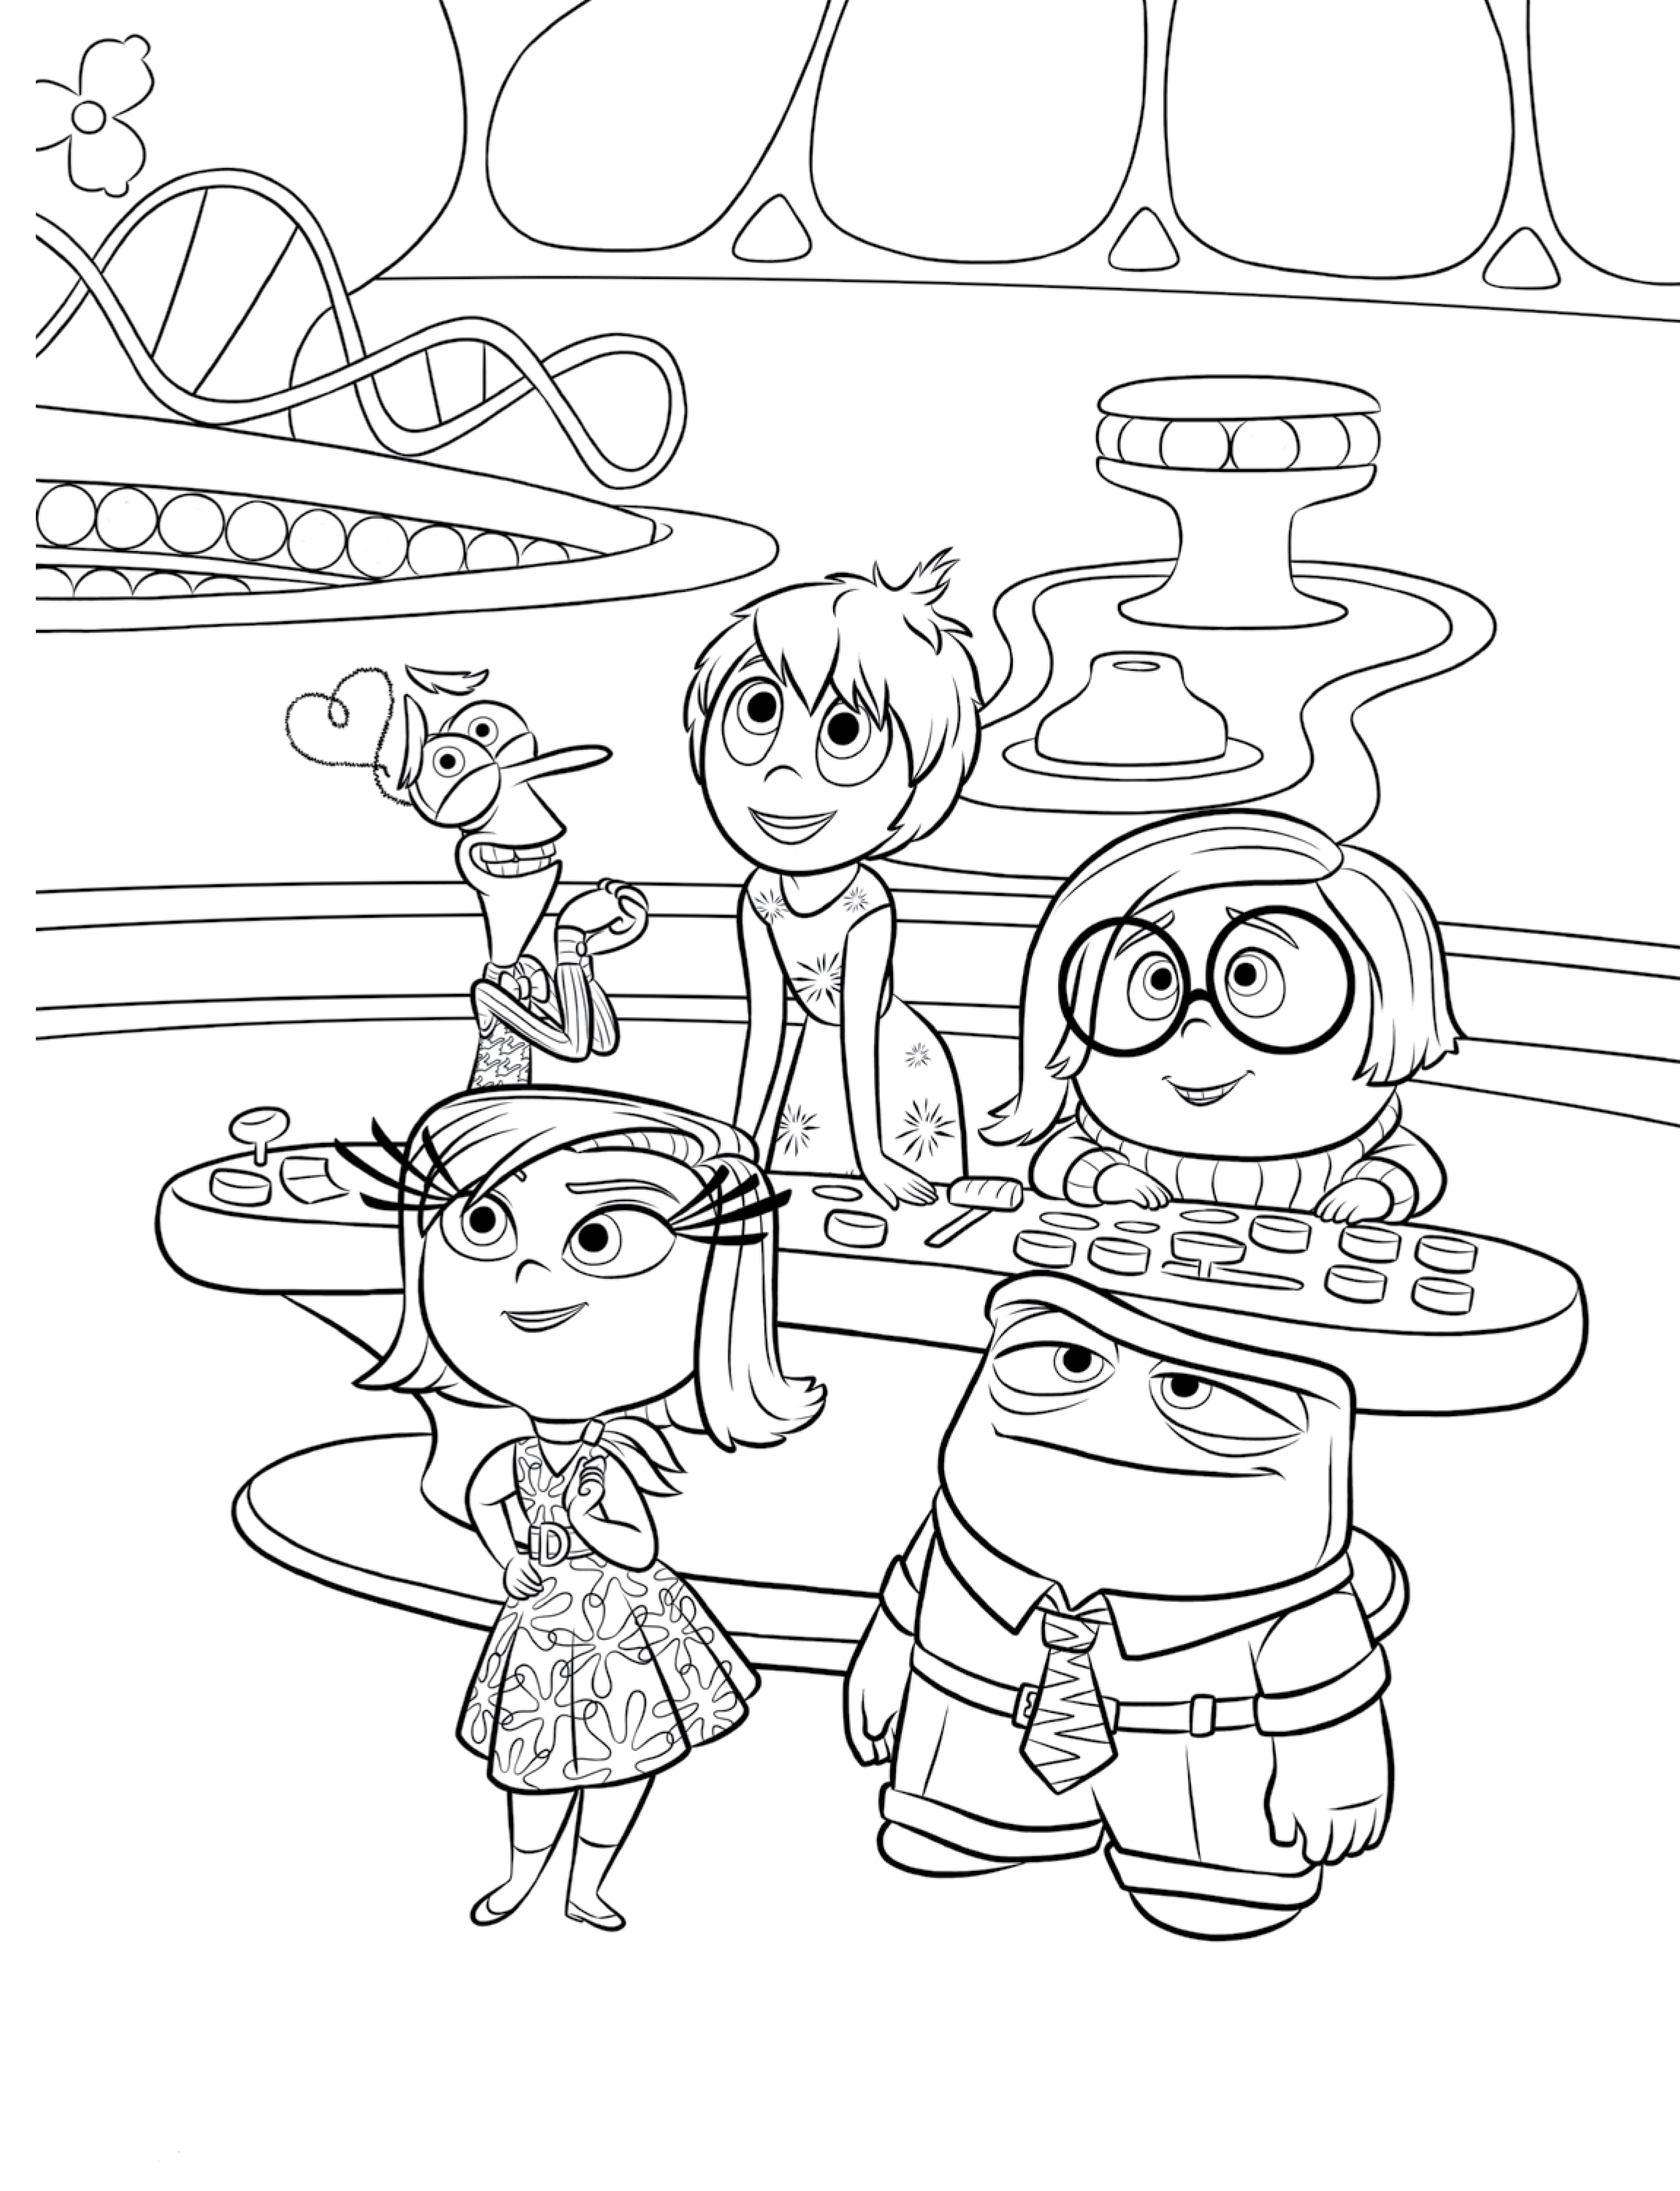 inside-out-coloring-pages-best-coloring-pages-for-kids